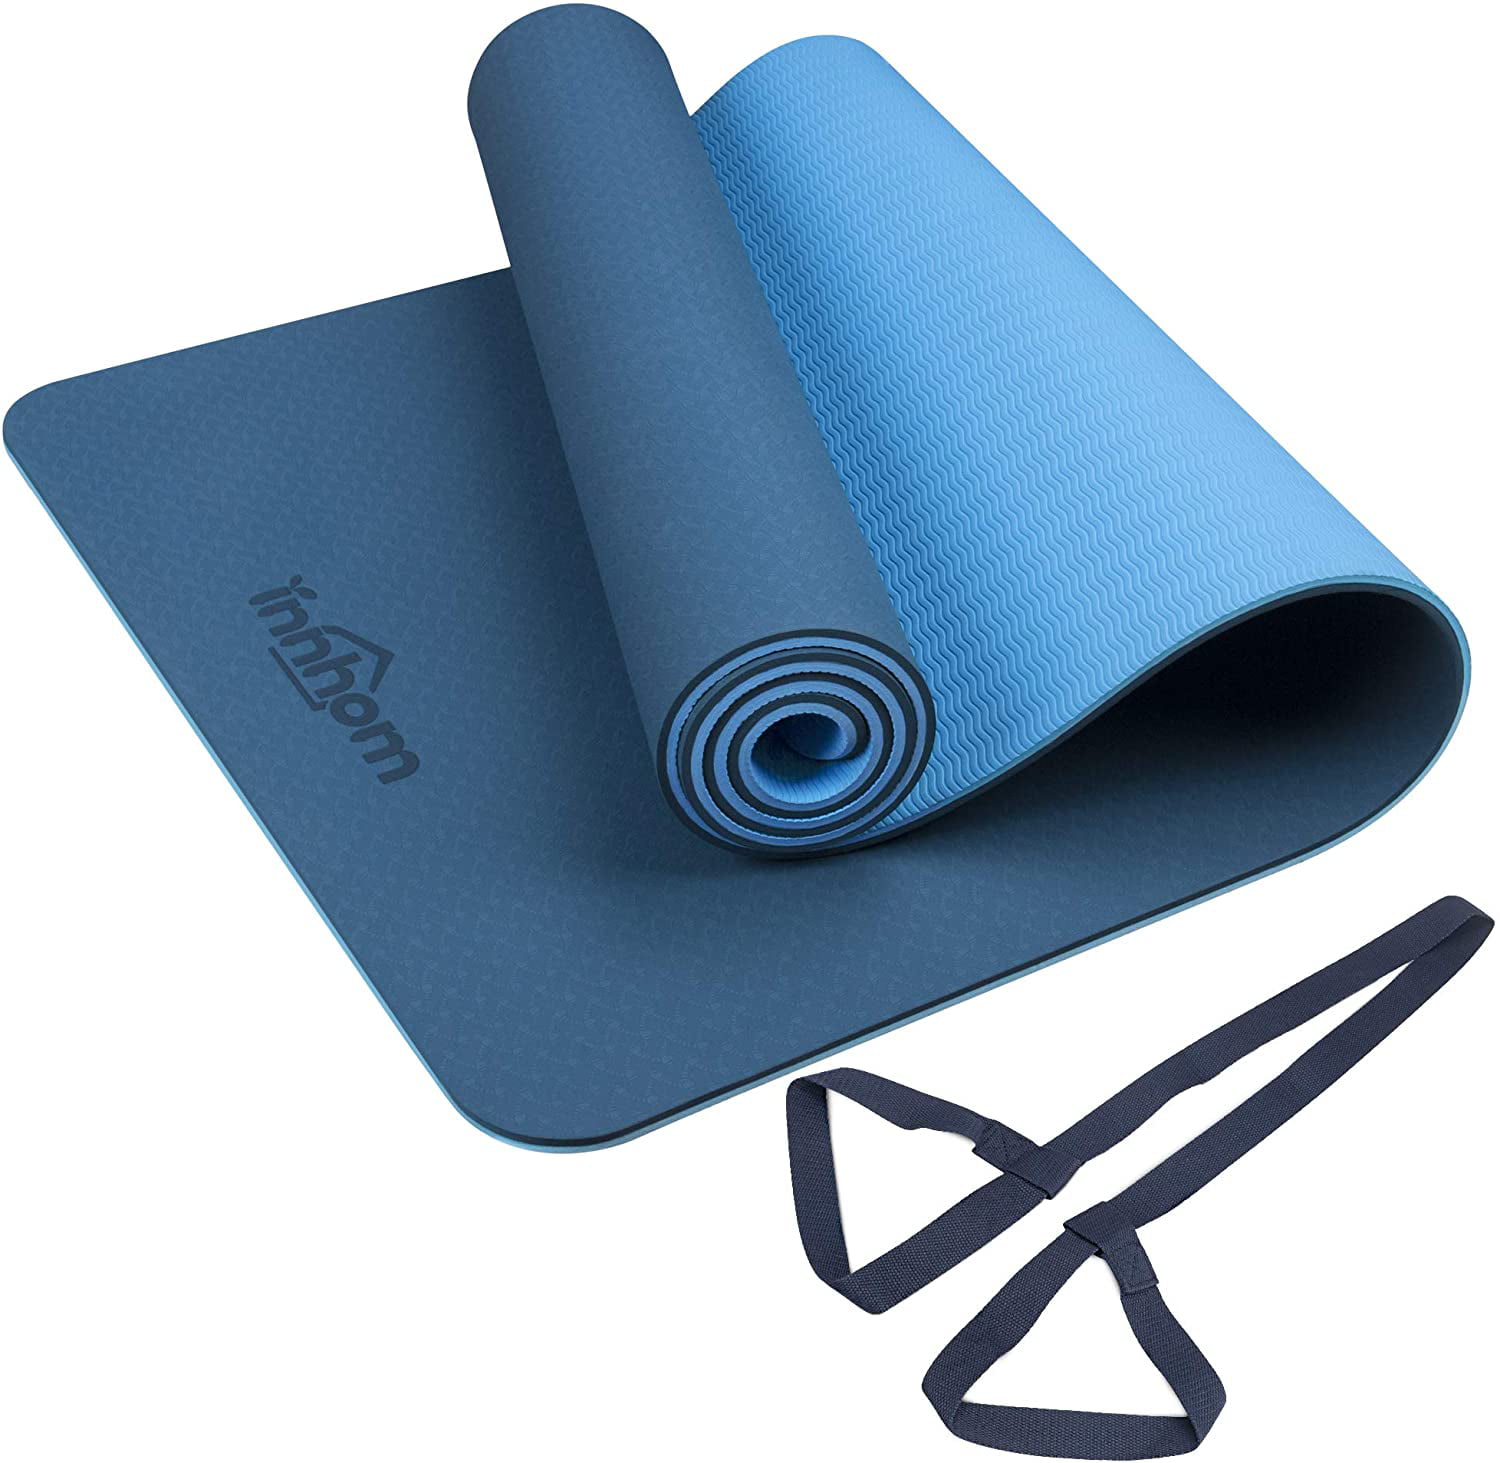 Perfect for Yoga Yoga Mat，1/4 Inch Thickness Yoga Mat Non Slip Textured Surfaces High Density Exercise & Fitness Mat Padding with Carrying Strap Pilates and Workout 